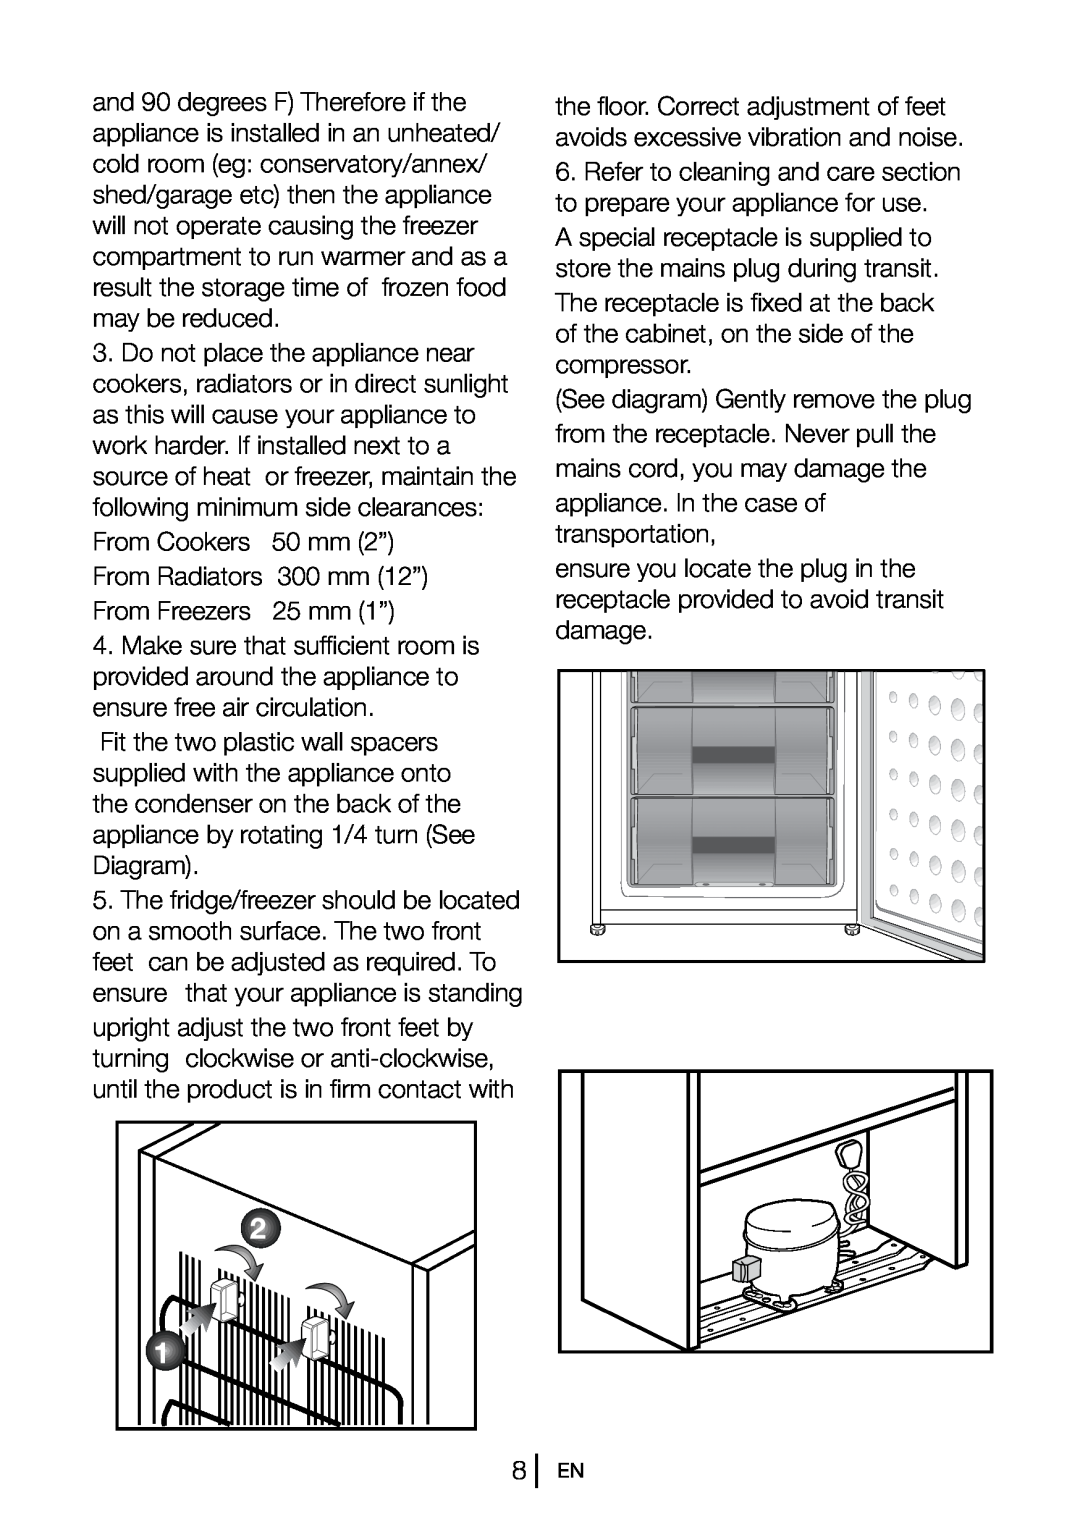 Beko CS5533APW manual From Cookers 50 mm 2” From Radiators 300 mm 12” From Freezers 25 mm 1” 